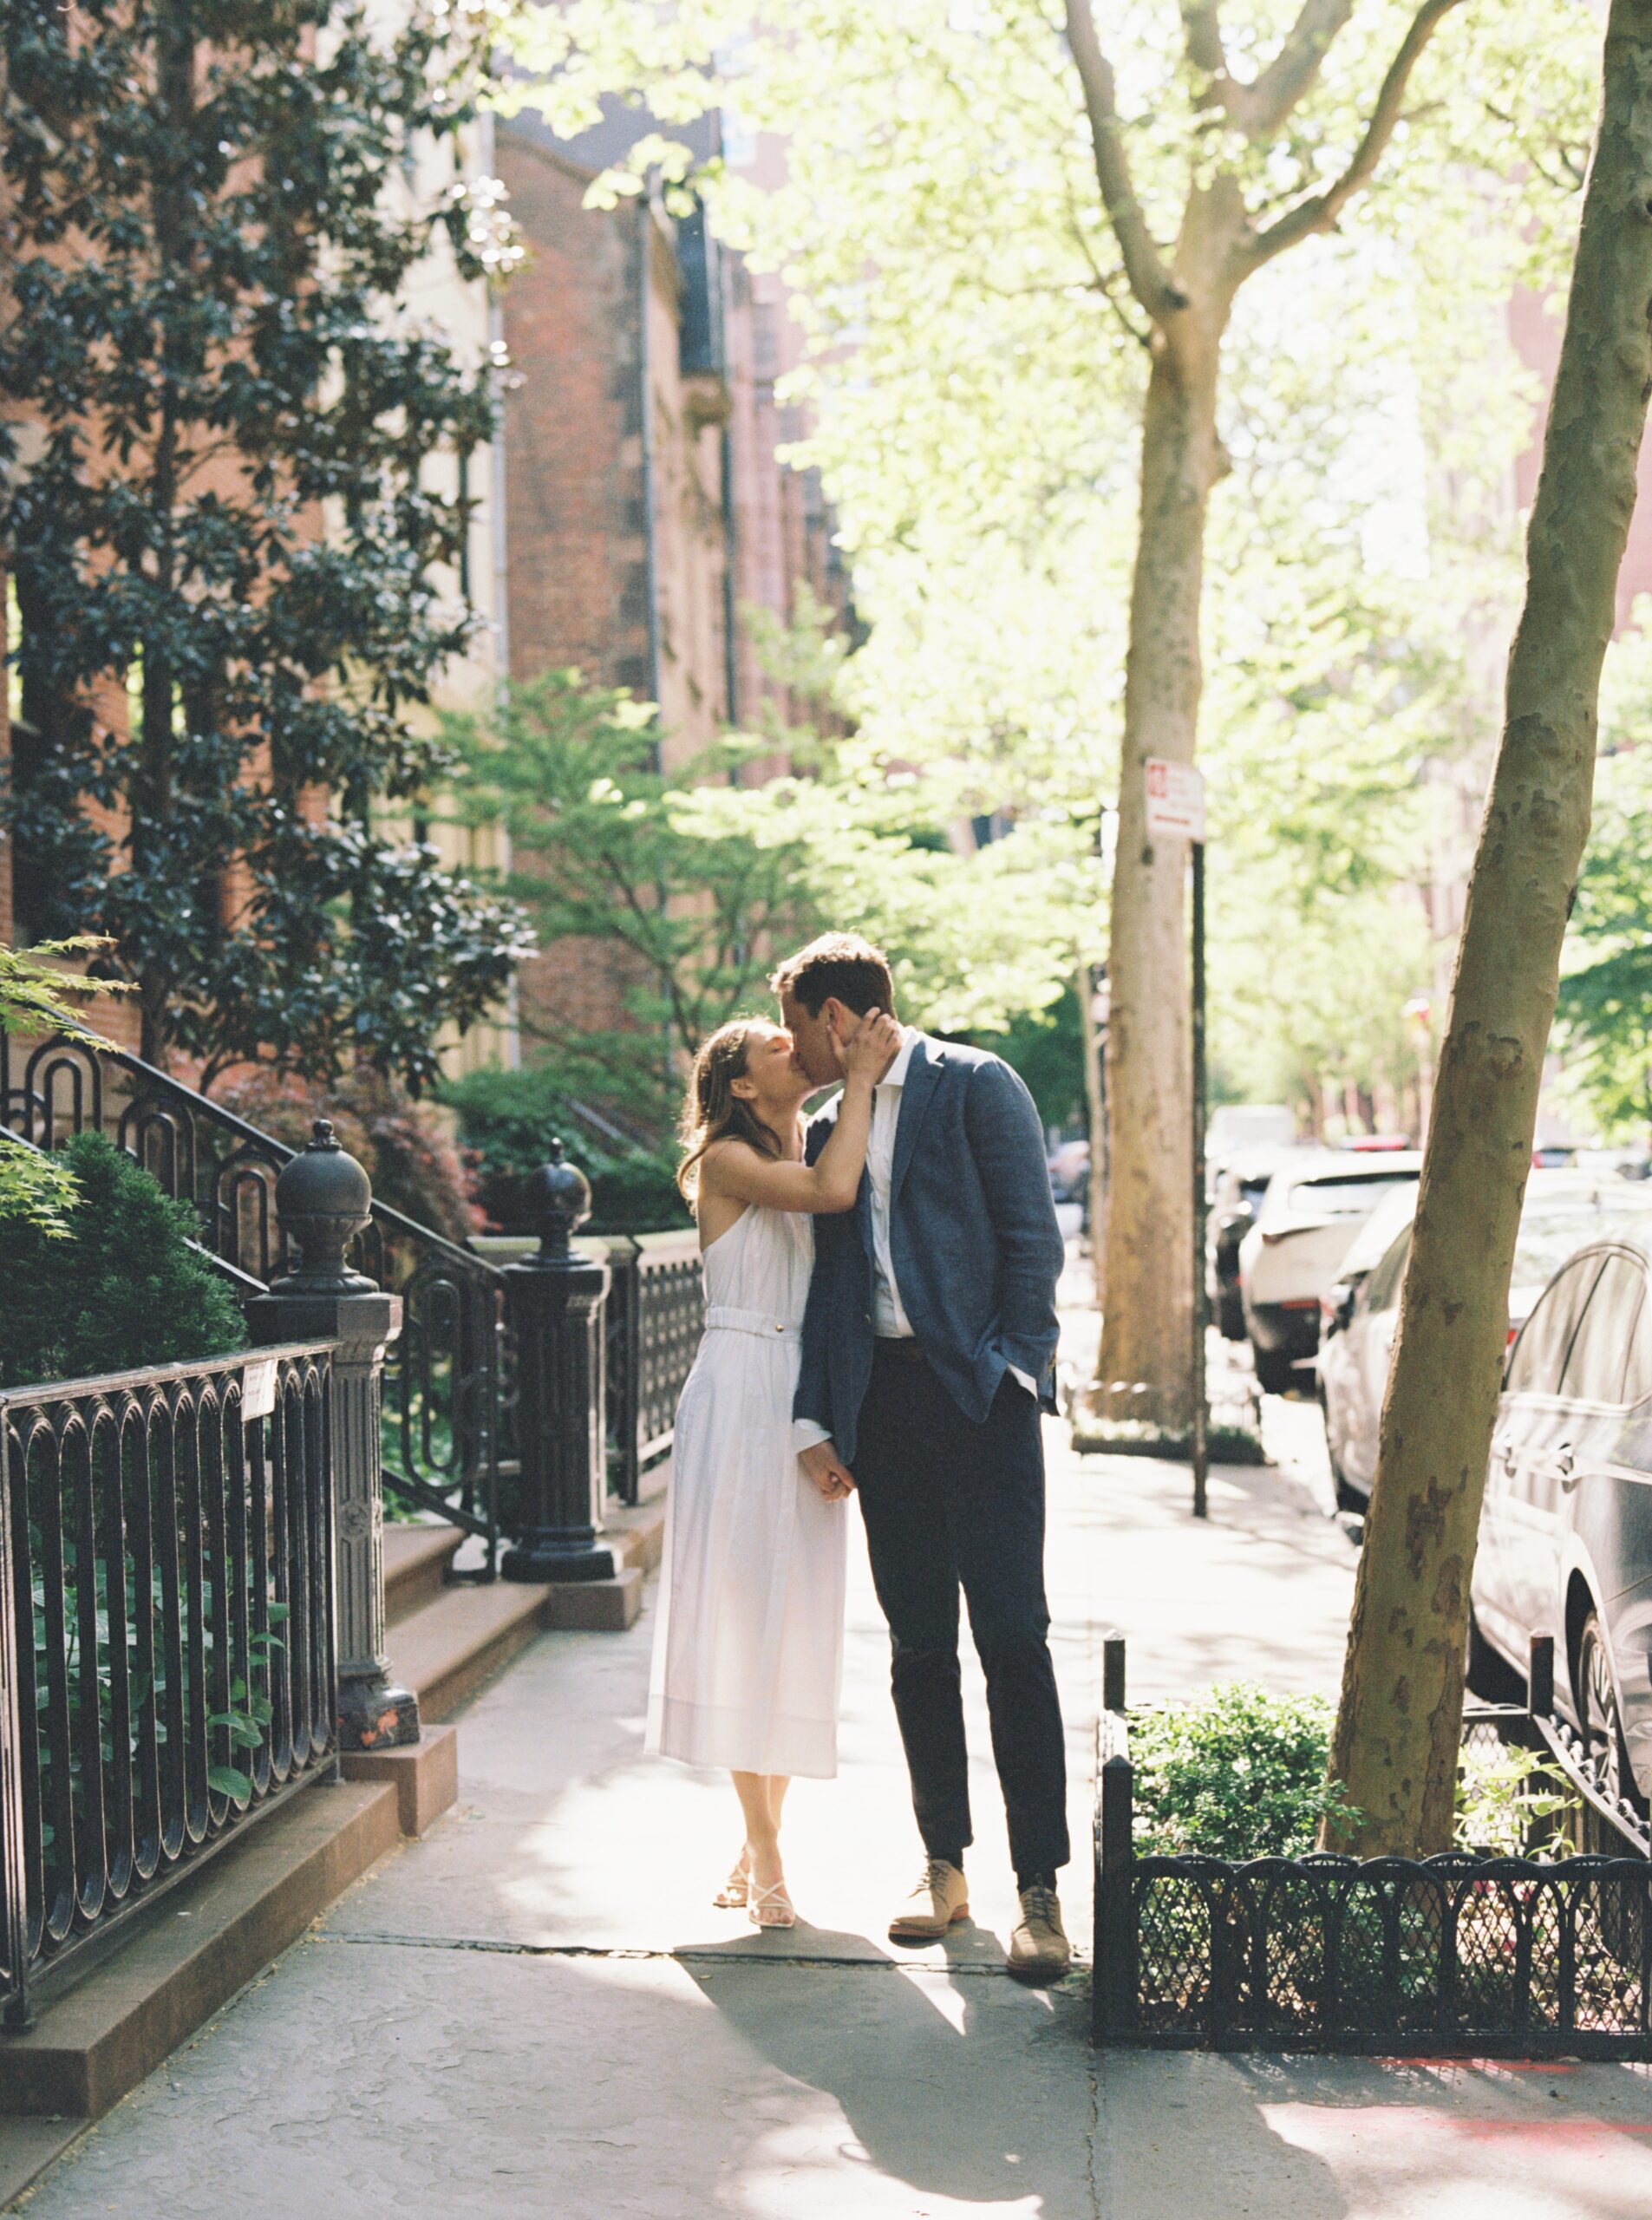 The couple kissing romantically on the street in Greenwich Village.